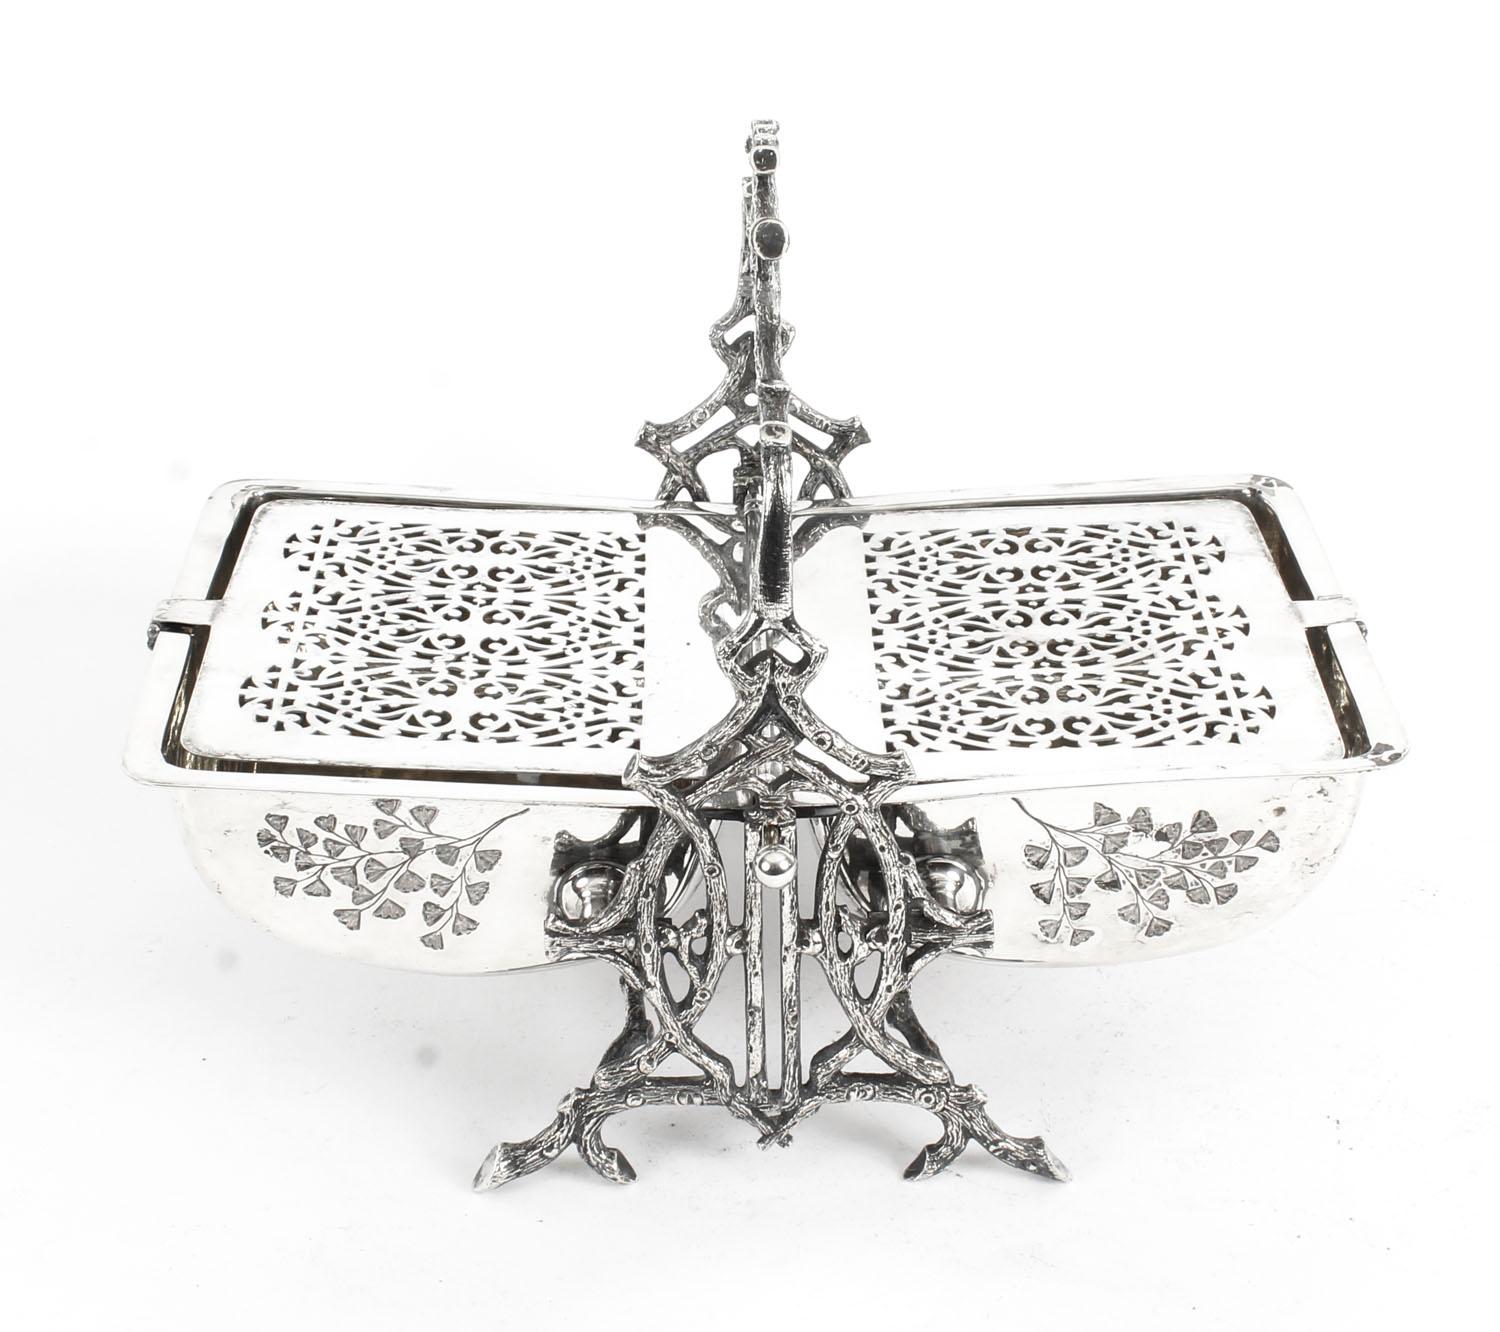 Antique English Silver Plated Folding Sweets Biscuit Box, 19th Century 4